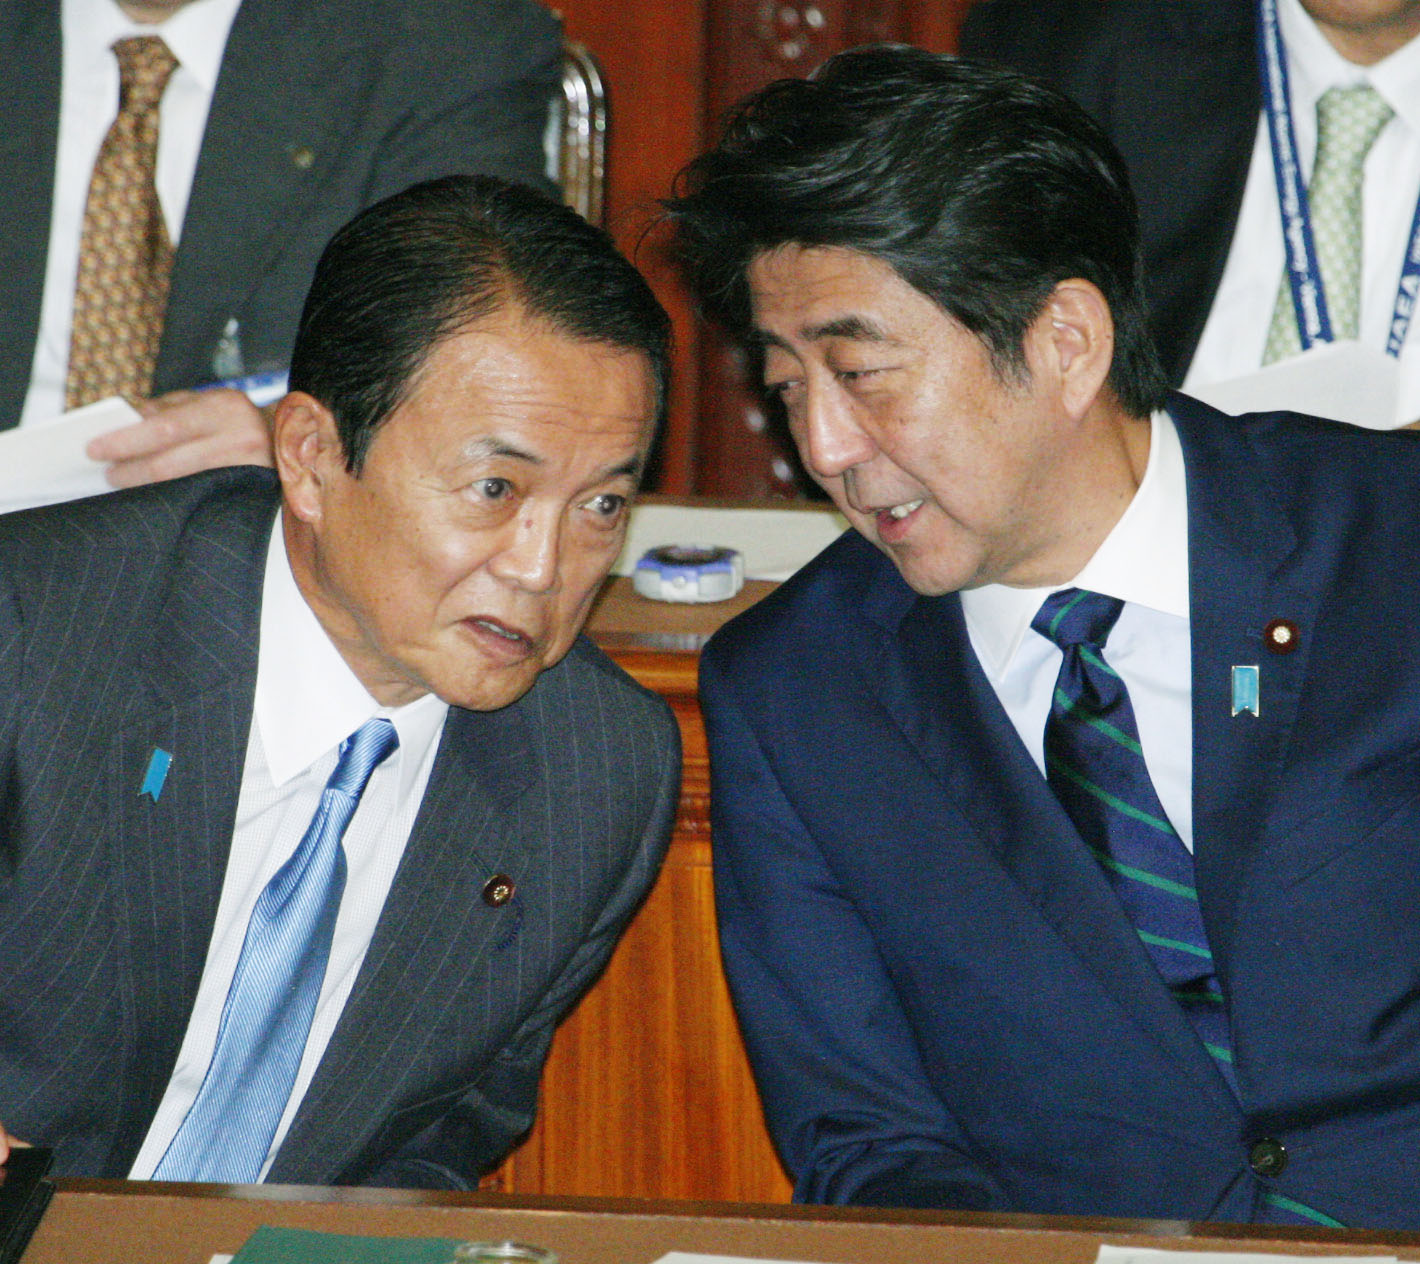 Don't panic: Prime Minister Shinzo Abe (right) chats with Finance Minister Taro Aso during a Lower House session Wednesday. Abe told the session the mounting accumulation of radioactive water at the crippled Fukushima No. 1 nuclear plant is a situation that is 'under control.' | KYODO